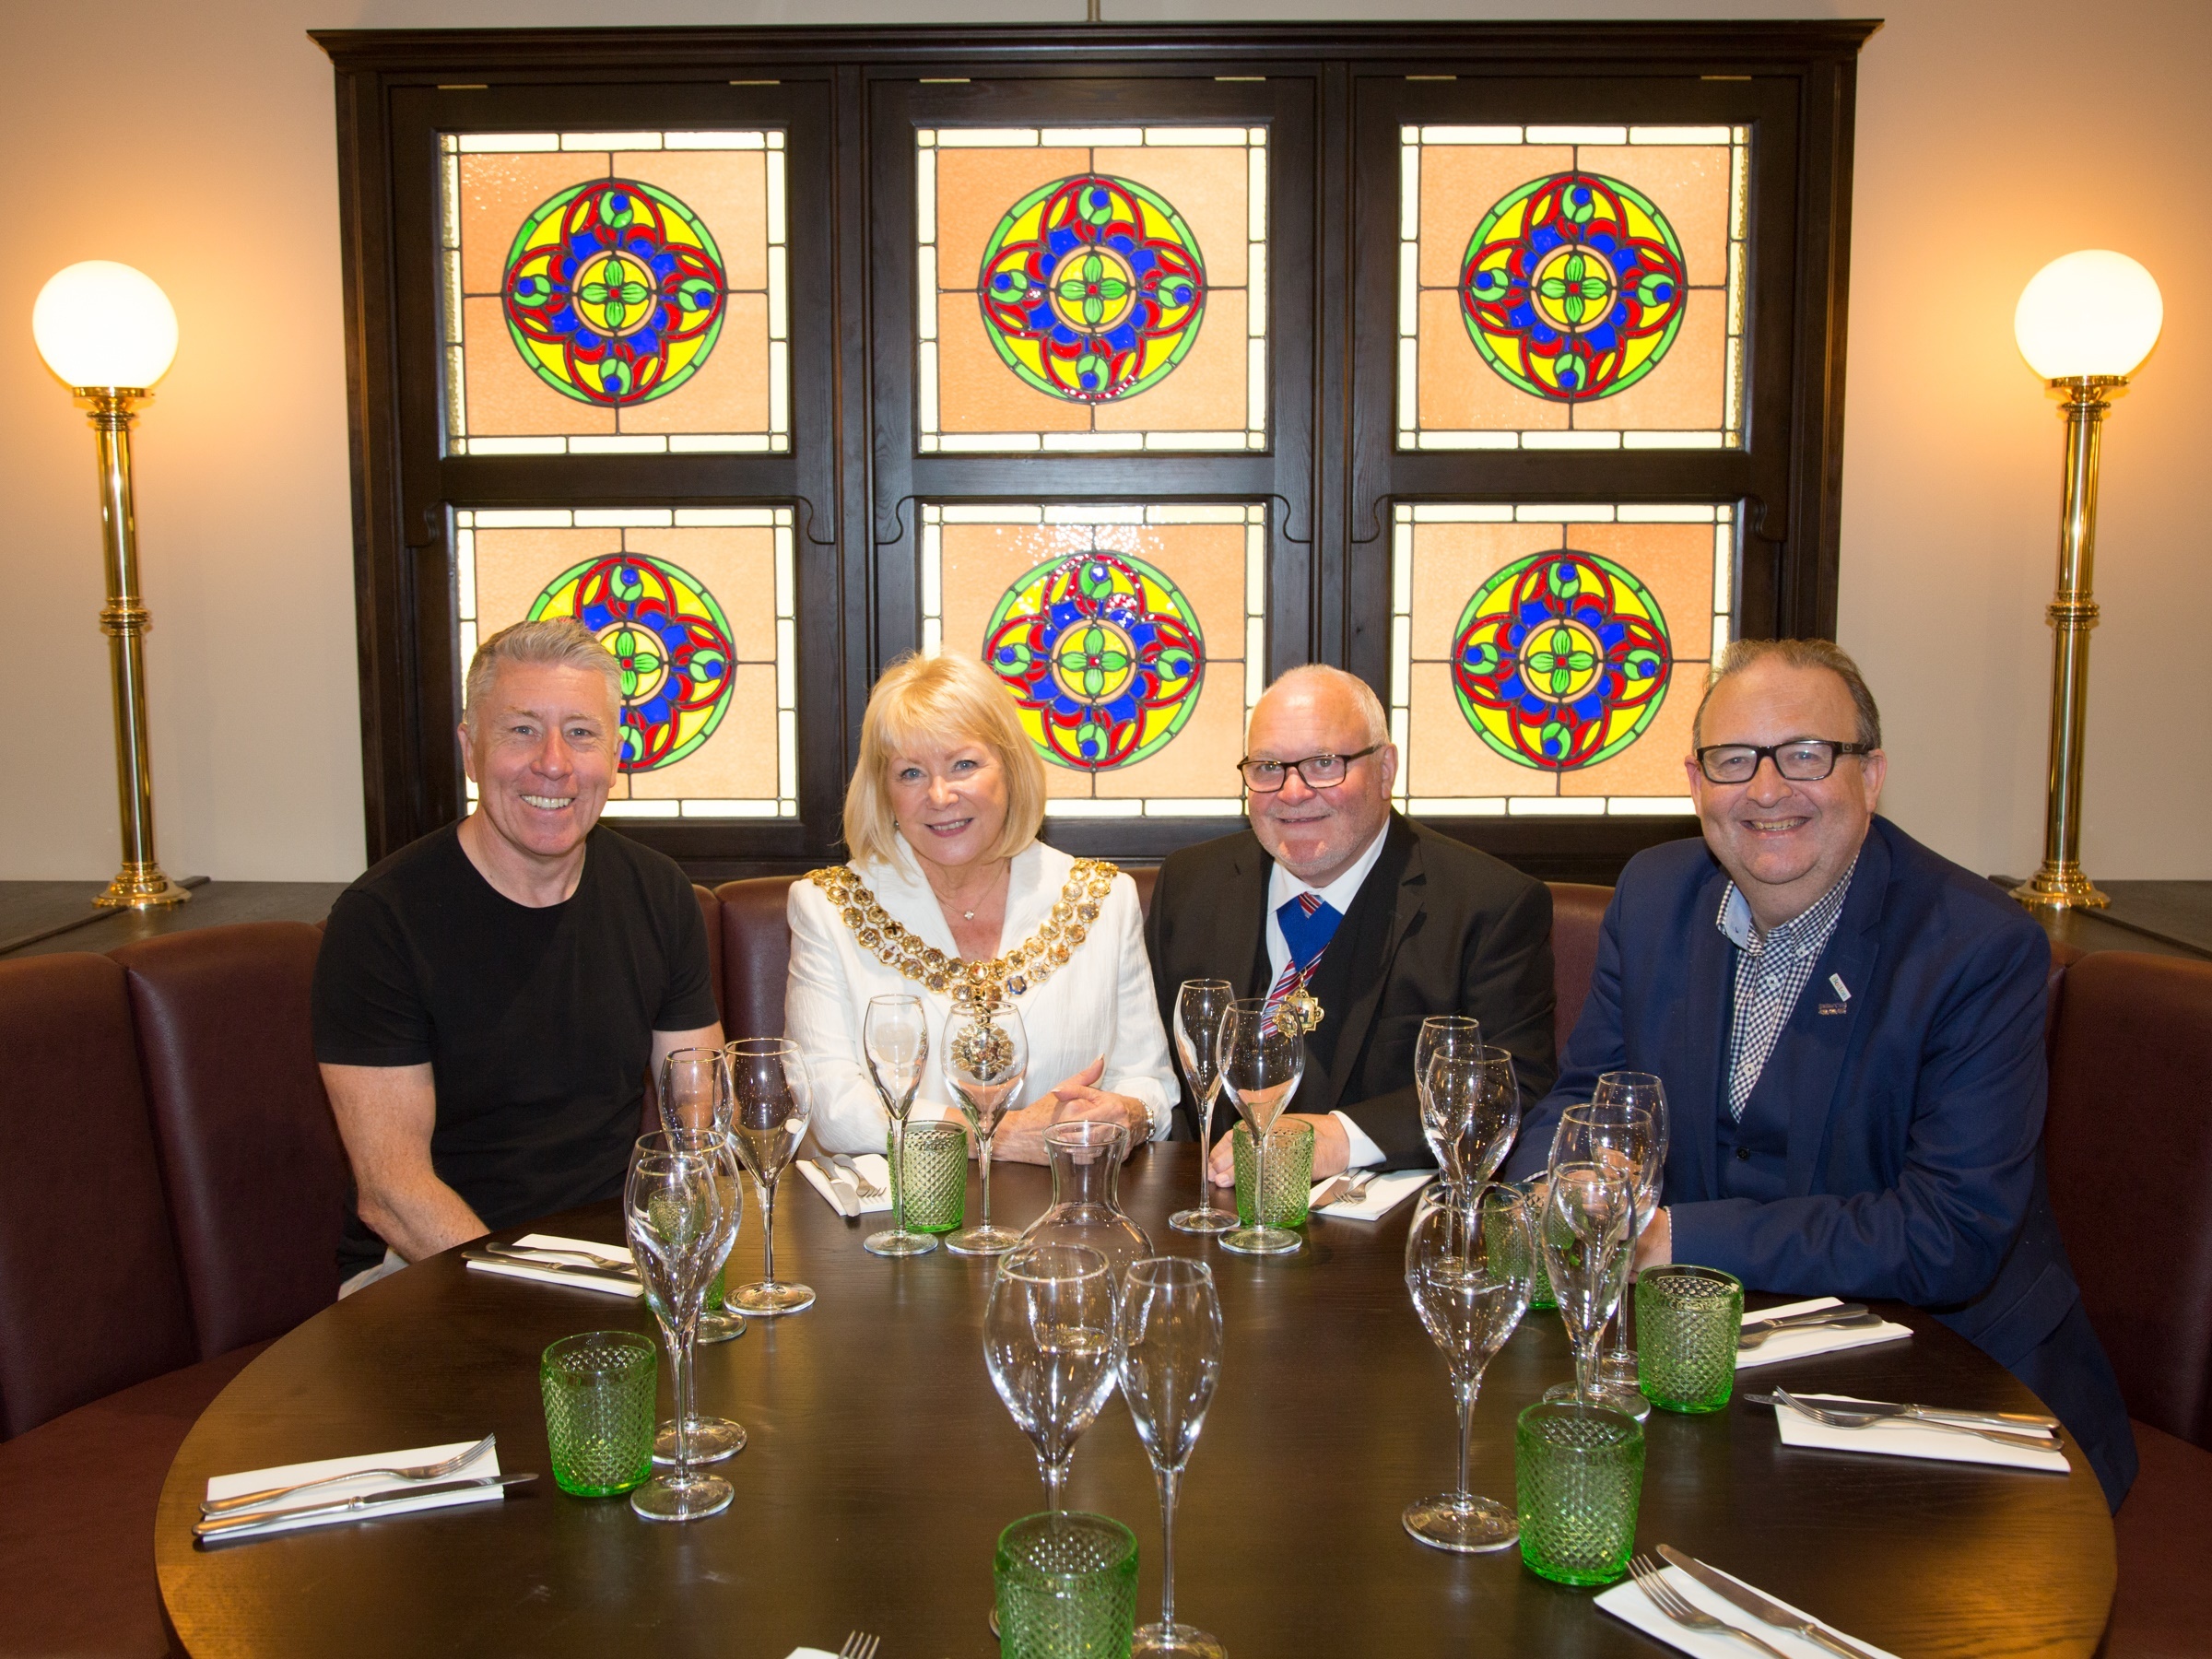 DINING: Paul Heathcote Paul Heathcote (left) welcomes the Mayor of Bolton, Cllr Hilary Fairclough; the Mayor?s Consort, Don Fairclough, and the Leader of the Council, Cllr David Greenhalgh to The Northern